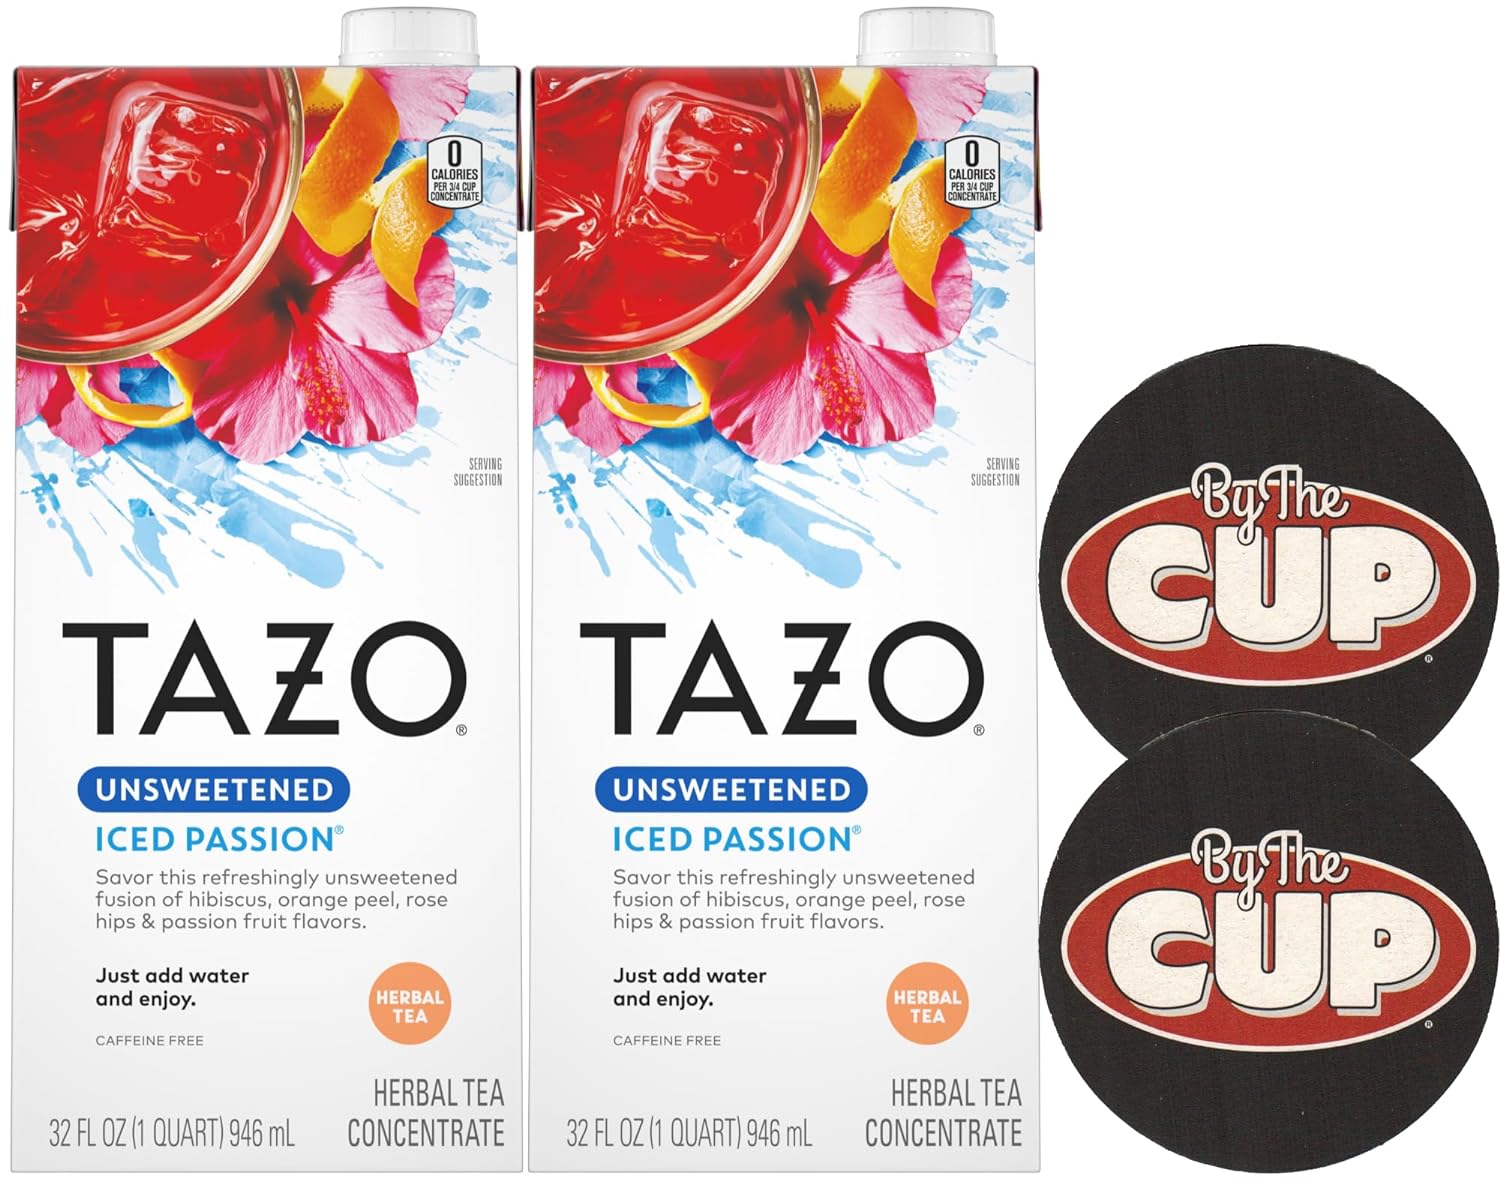 TAZO Unsweetened Iced Passion Herbal Tea Concentrate, 32 fl oz (Pack of 2) with By The Cup Coasters